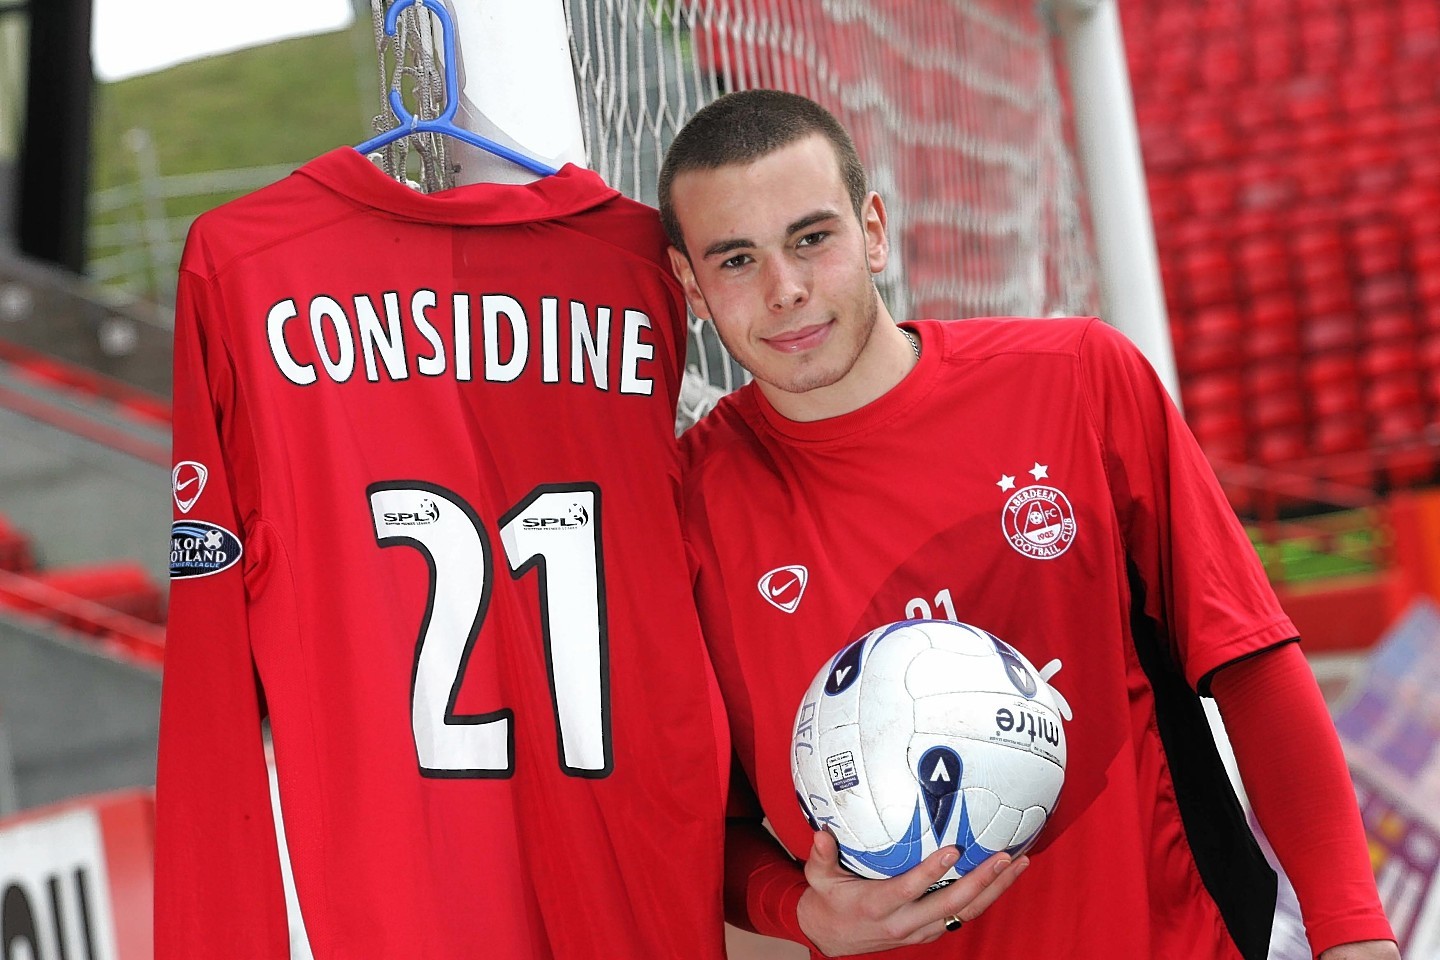 Considine has spent 10 years in the Dons first team  